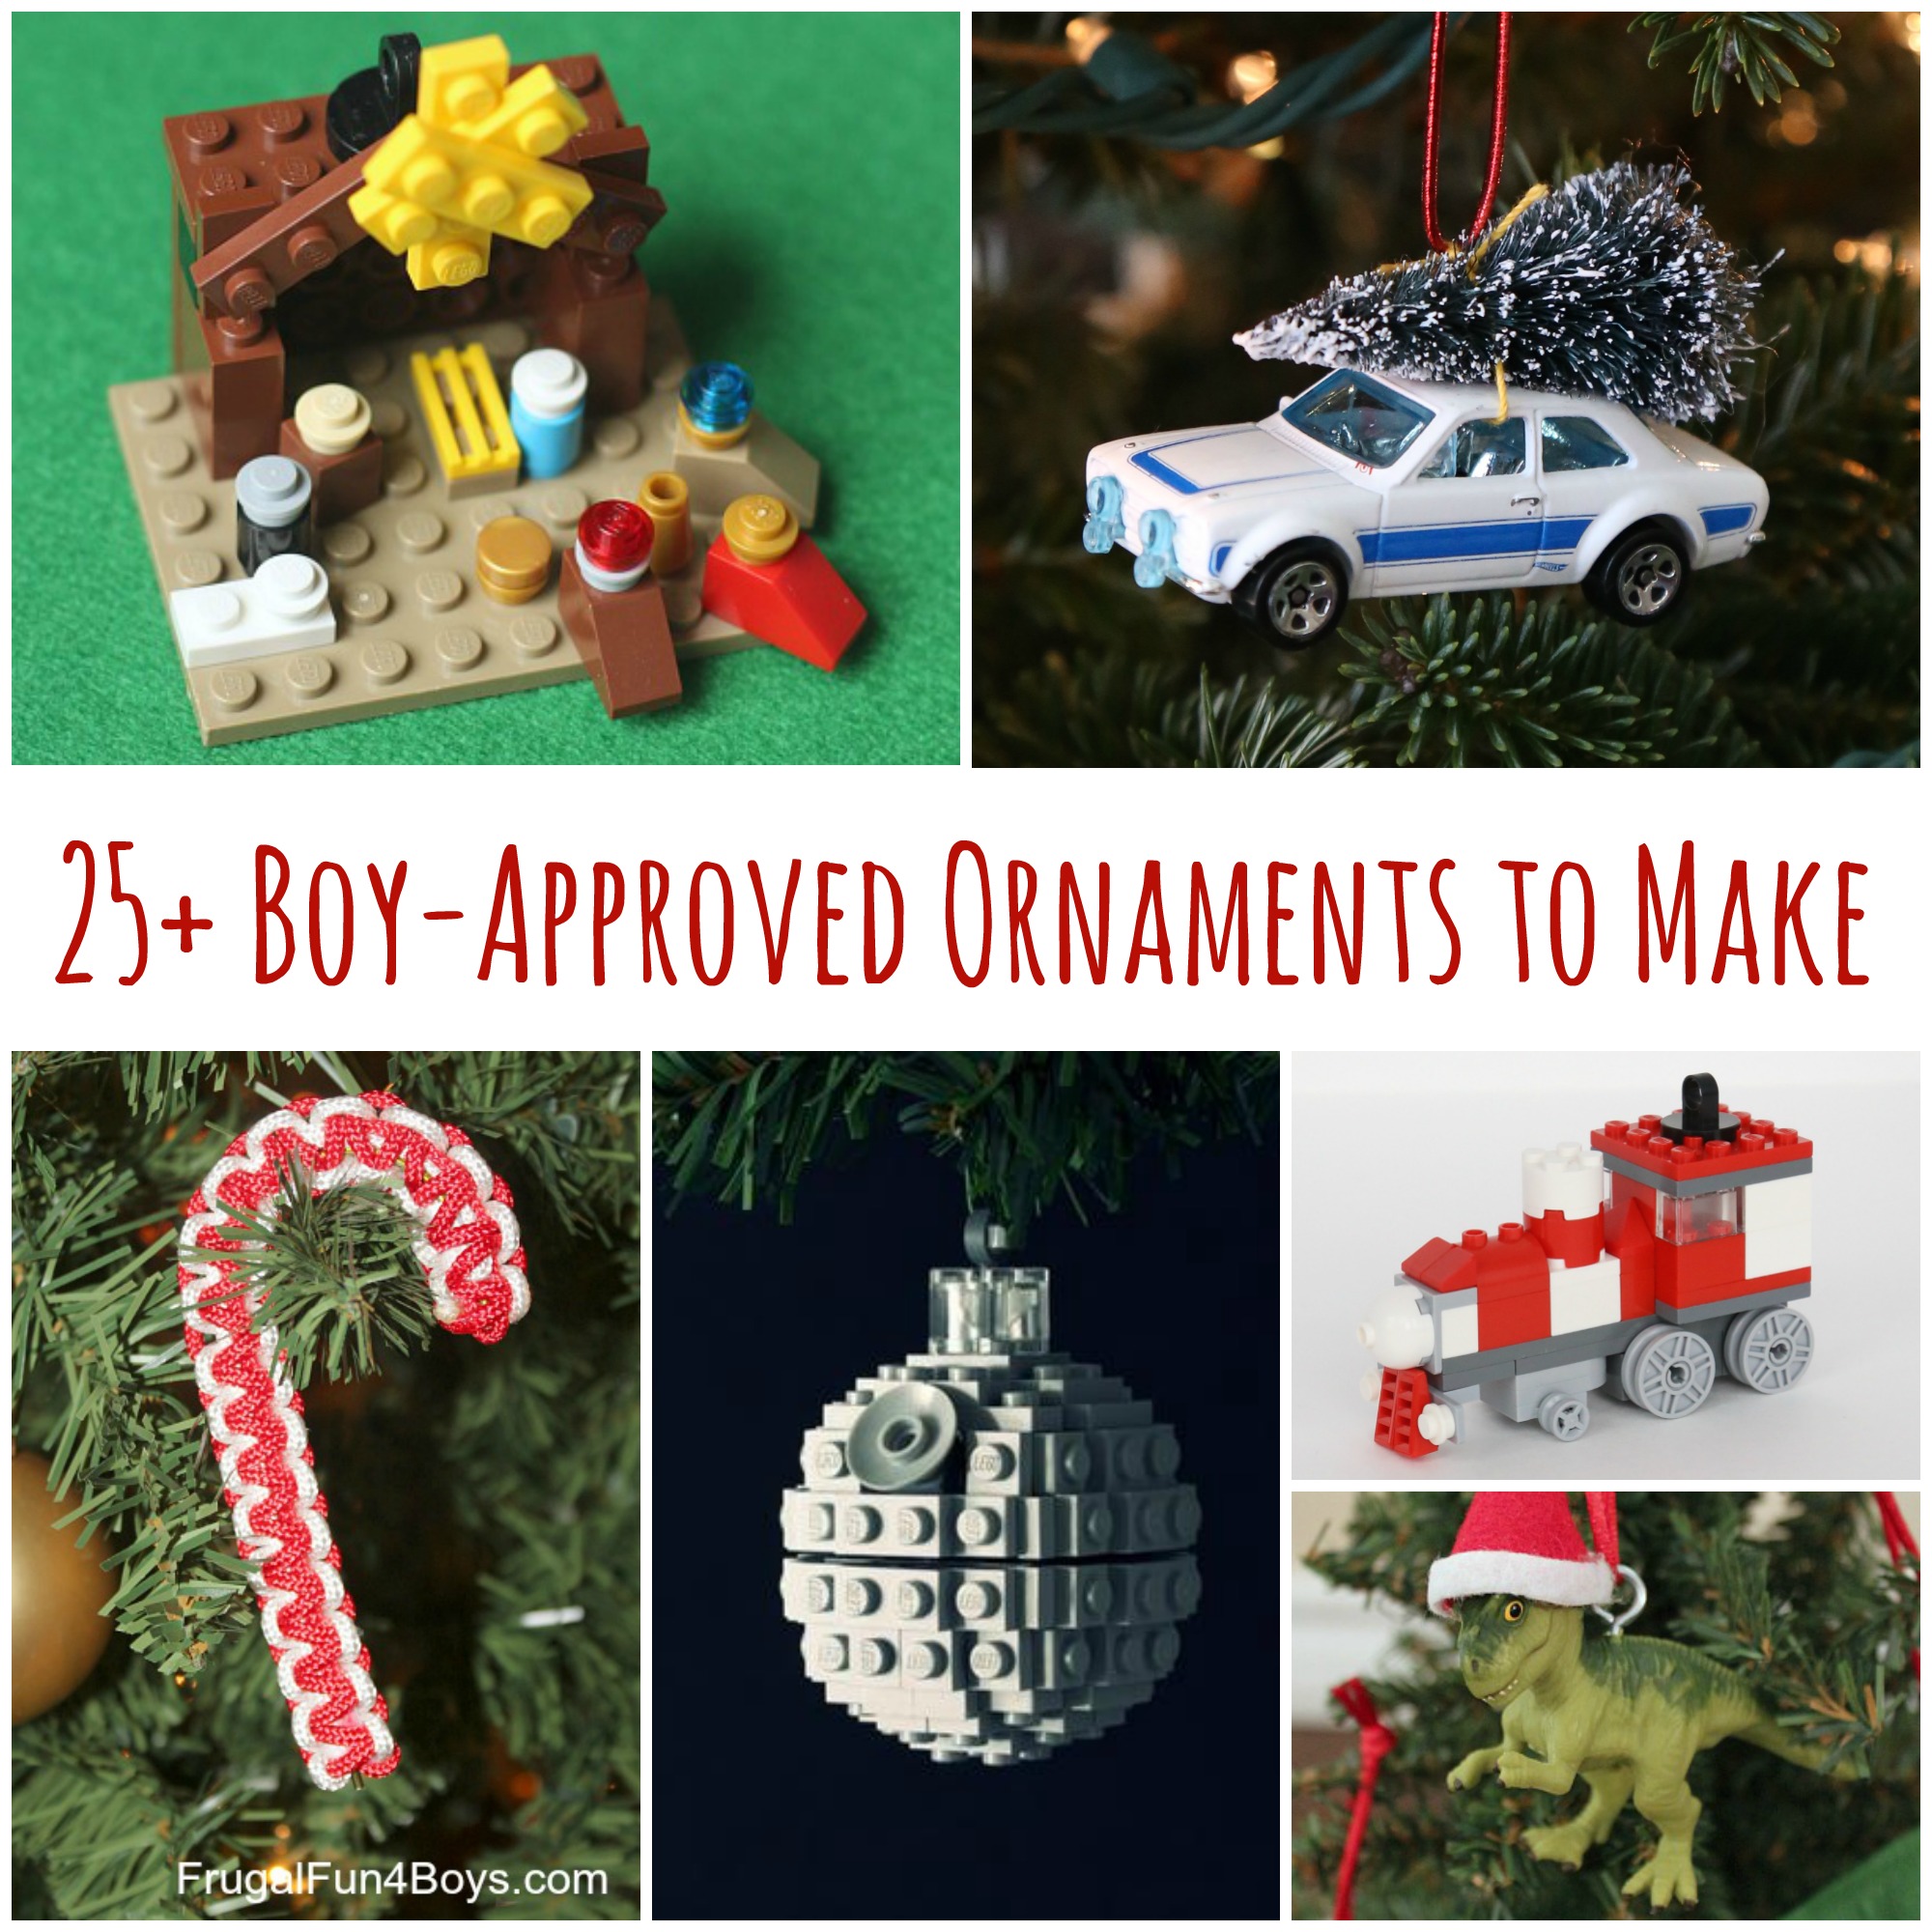 25+ Boy-Approved Ornaments to Make